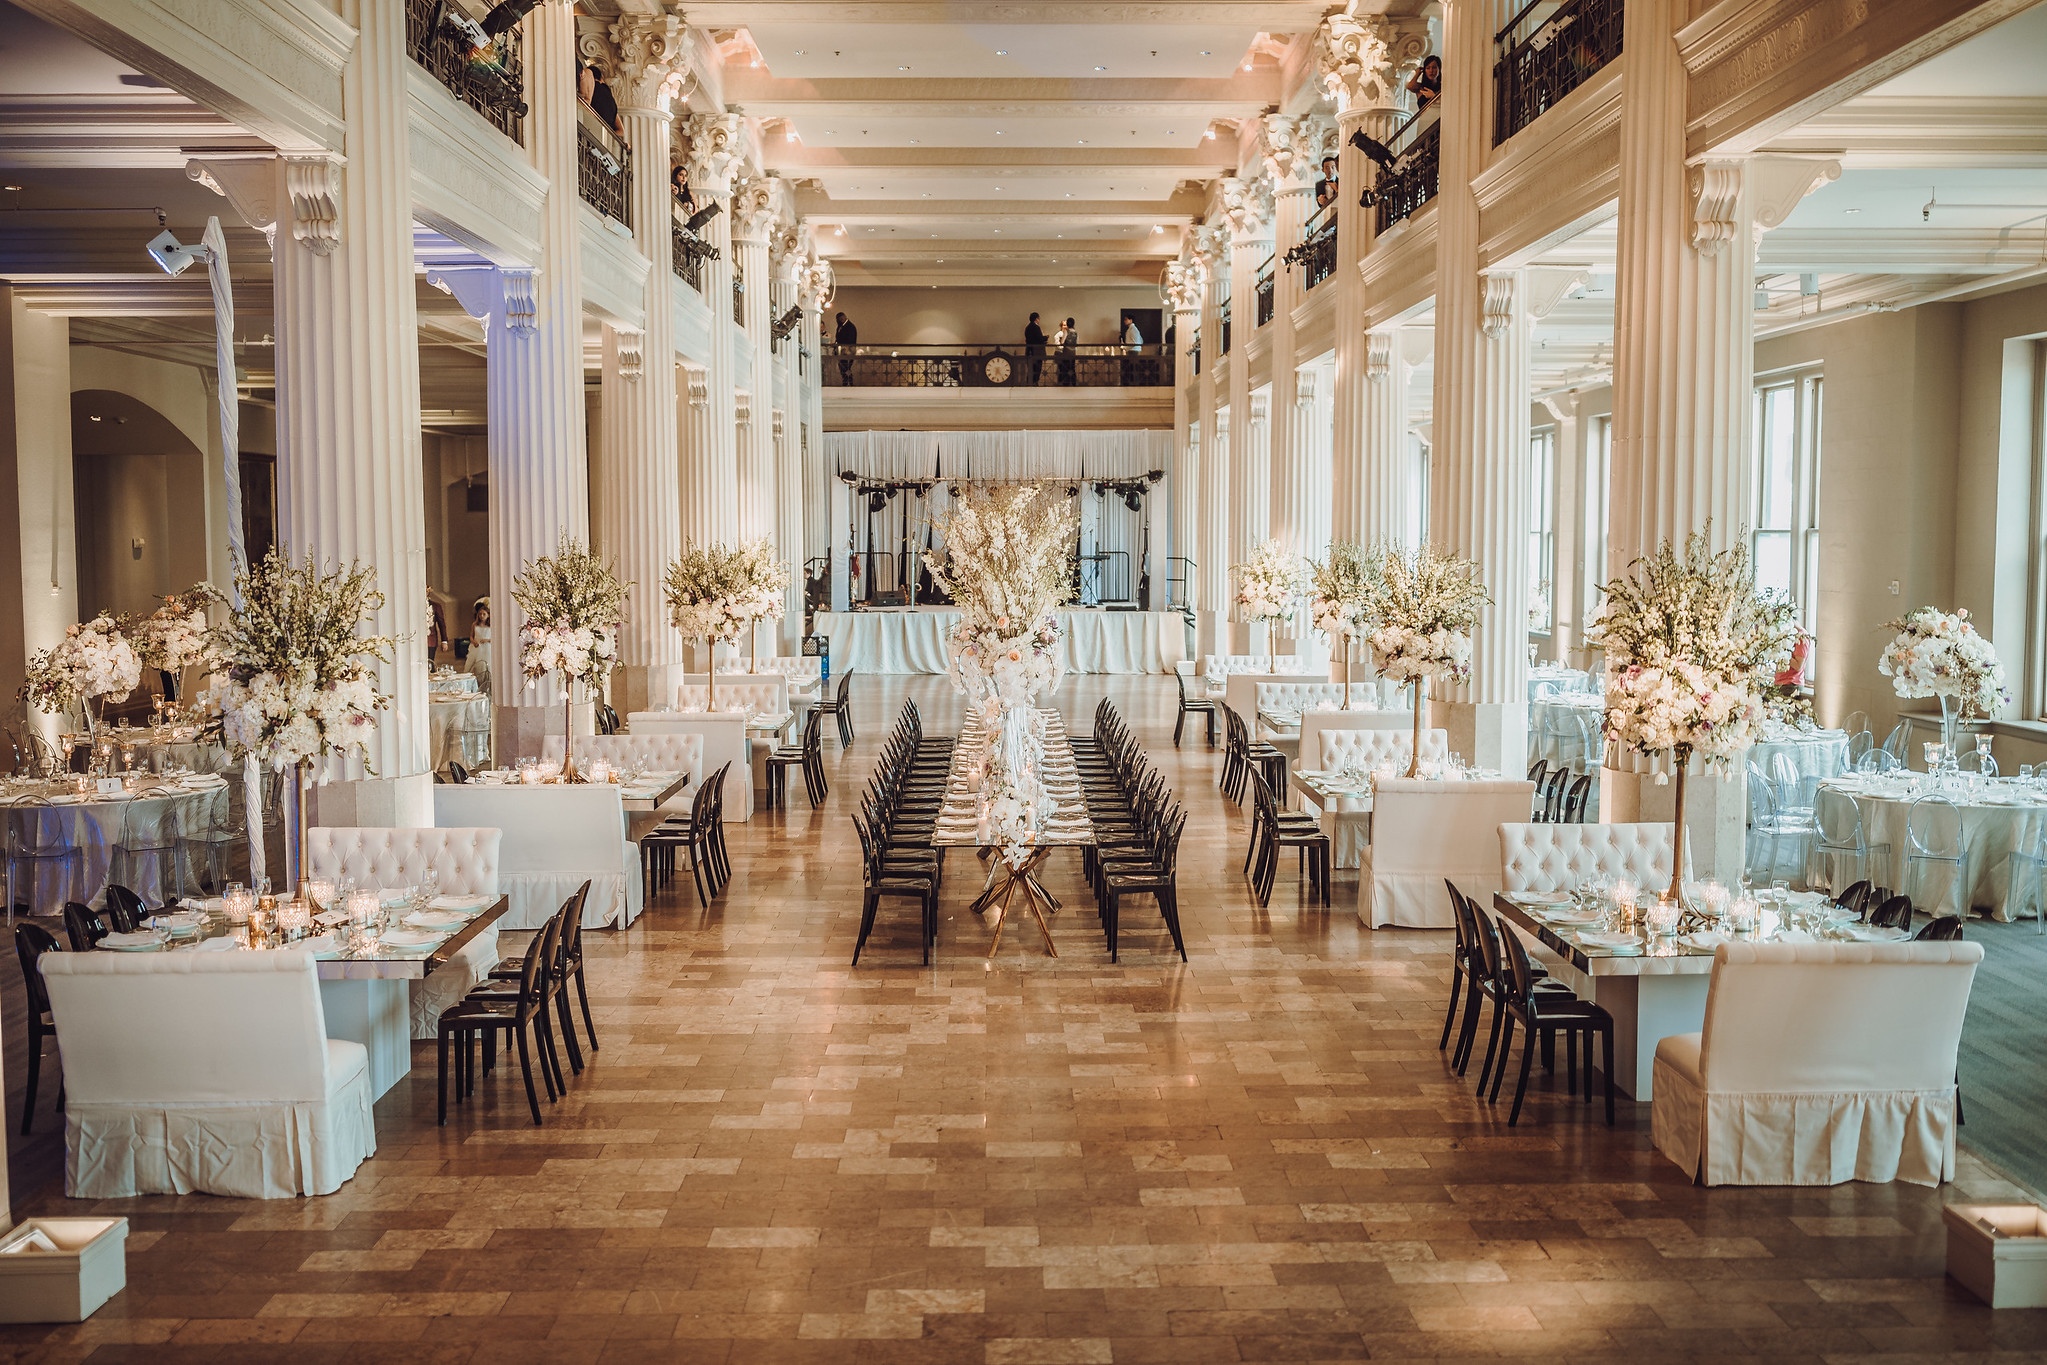 Elegant wedding reception hall adorned with floral centerpieces and candlelight, ready for guests.